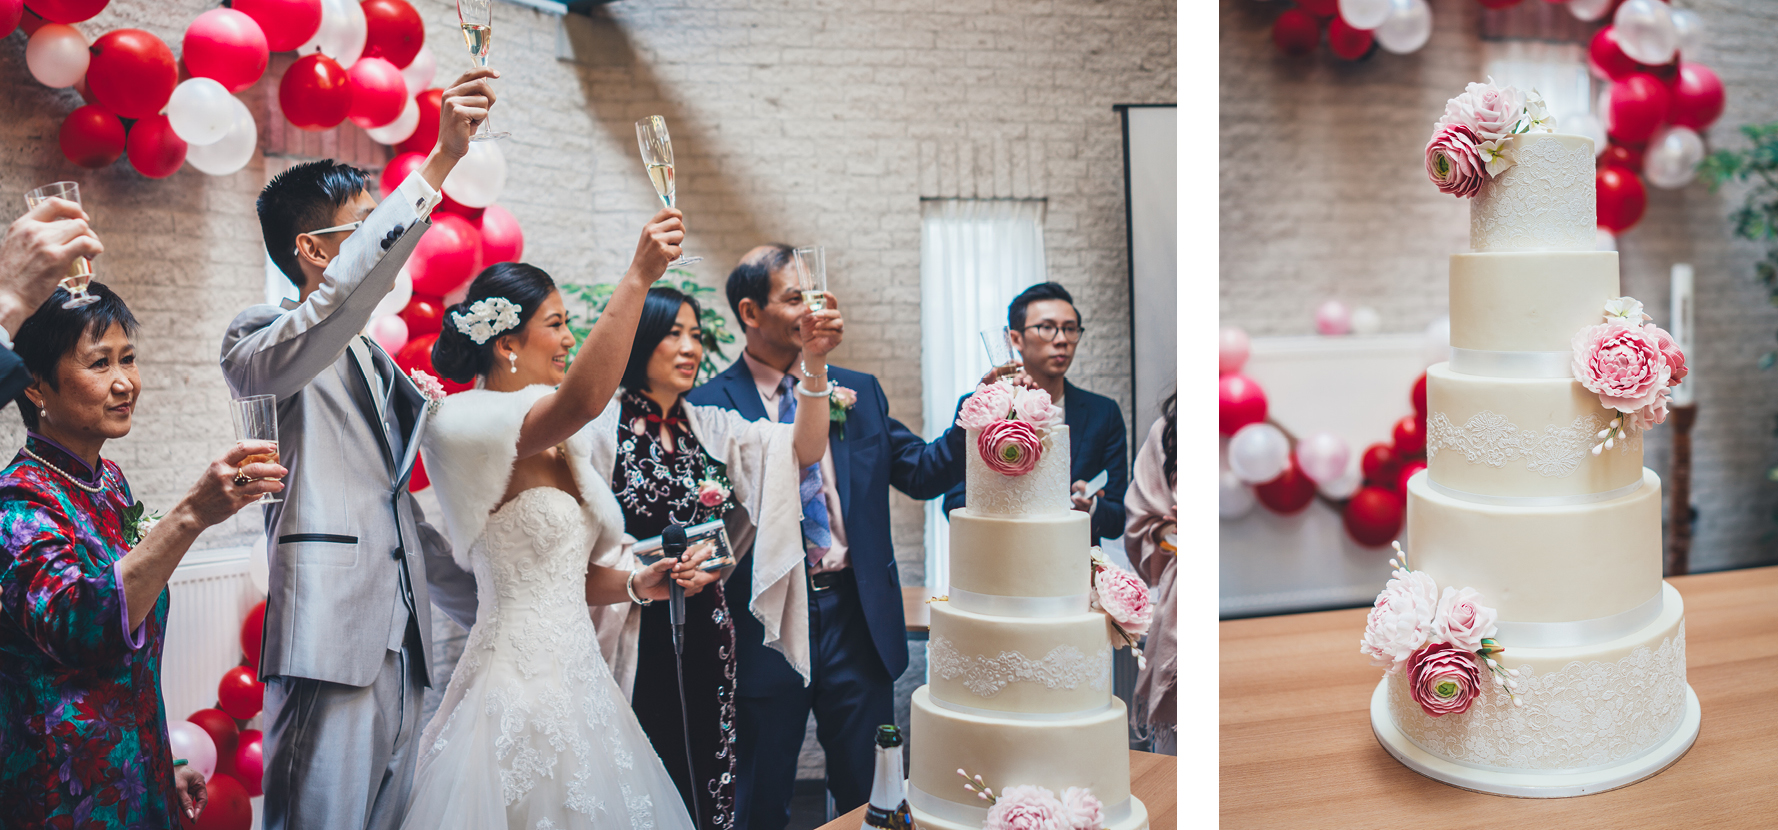 Reception, wedding photography: Melvin & Jessica, by José Chan